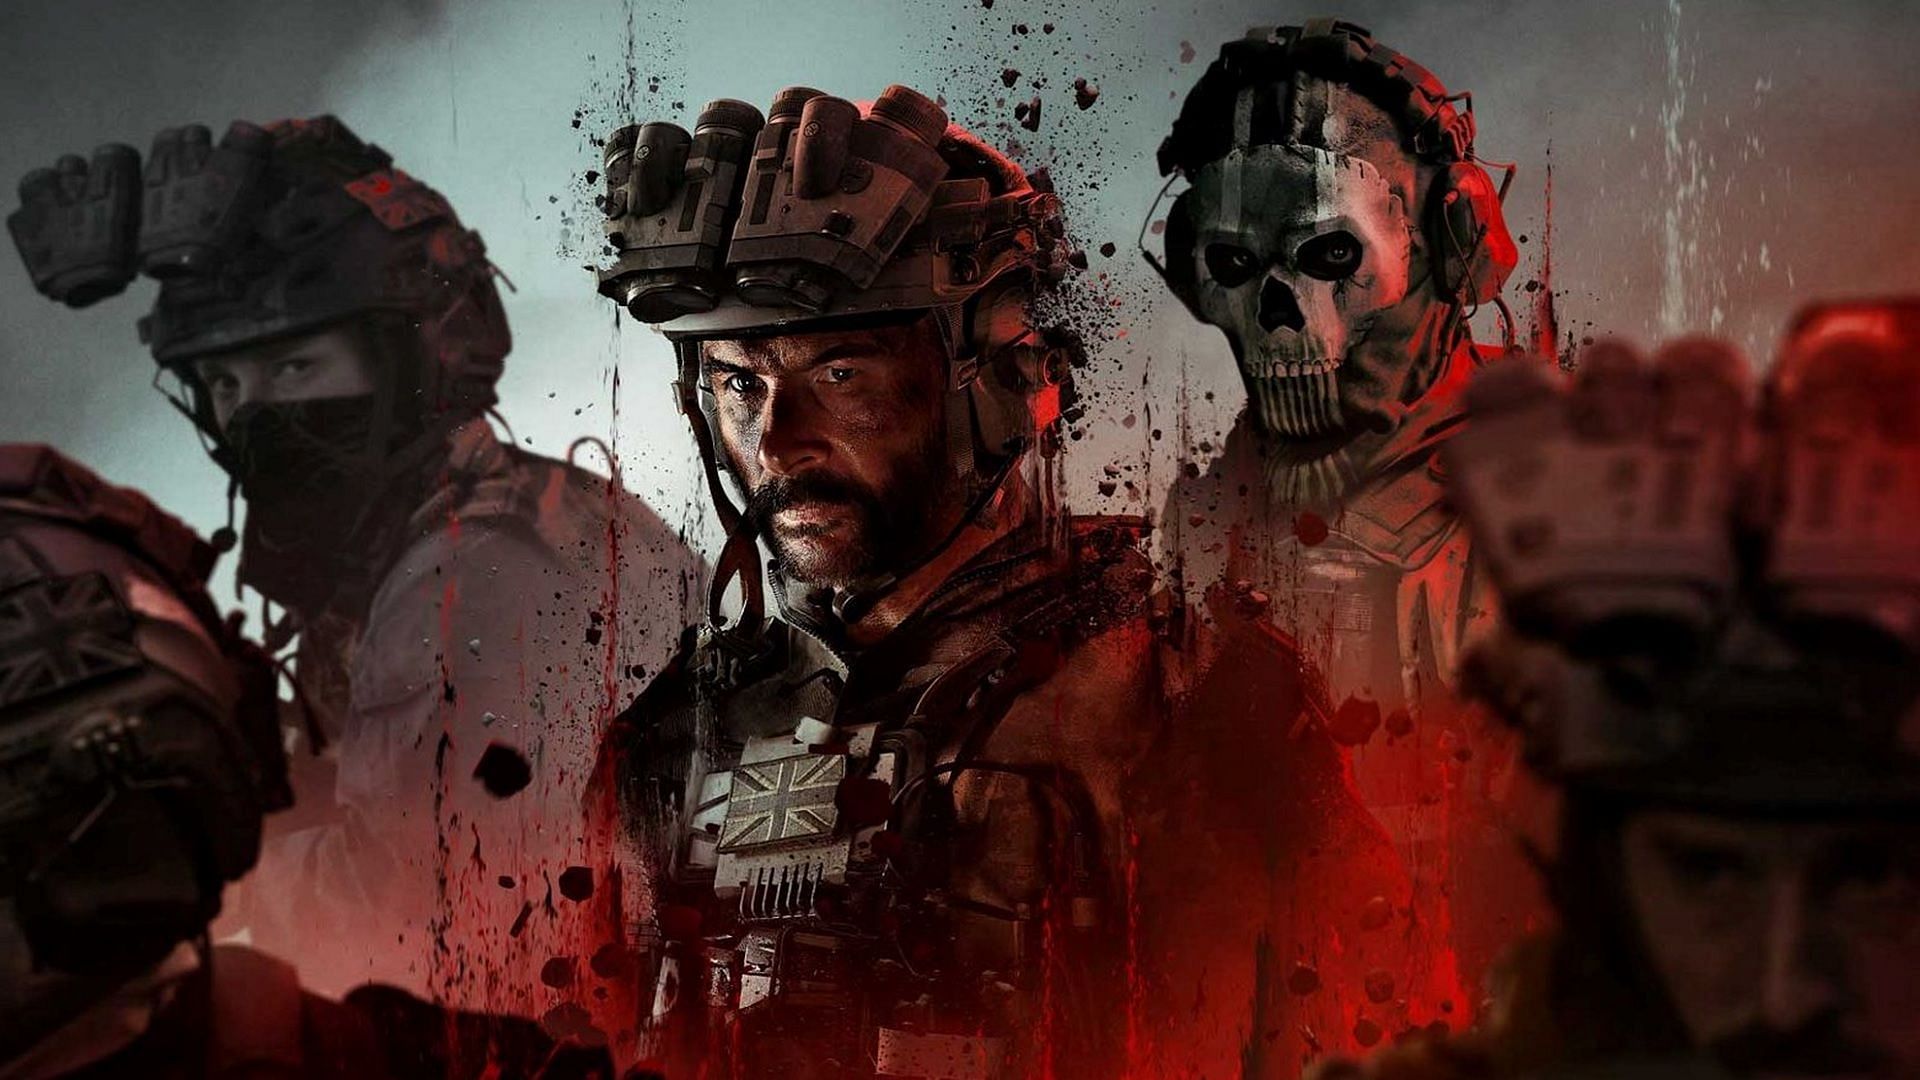 A new leak has seemingly confirmed the reveal of an arcade mode in Modern Warfare 3